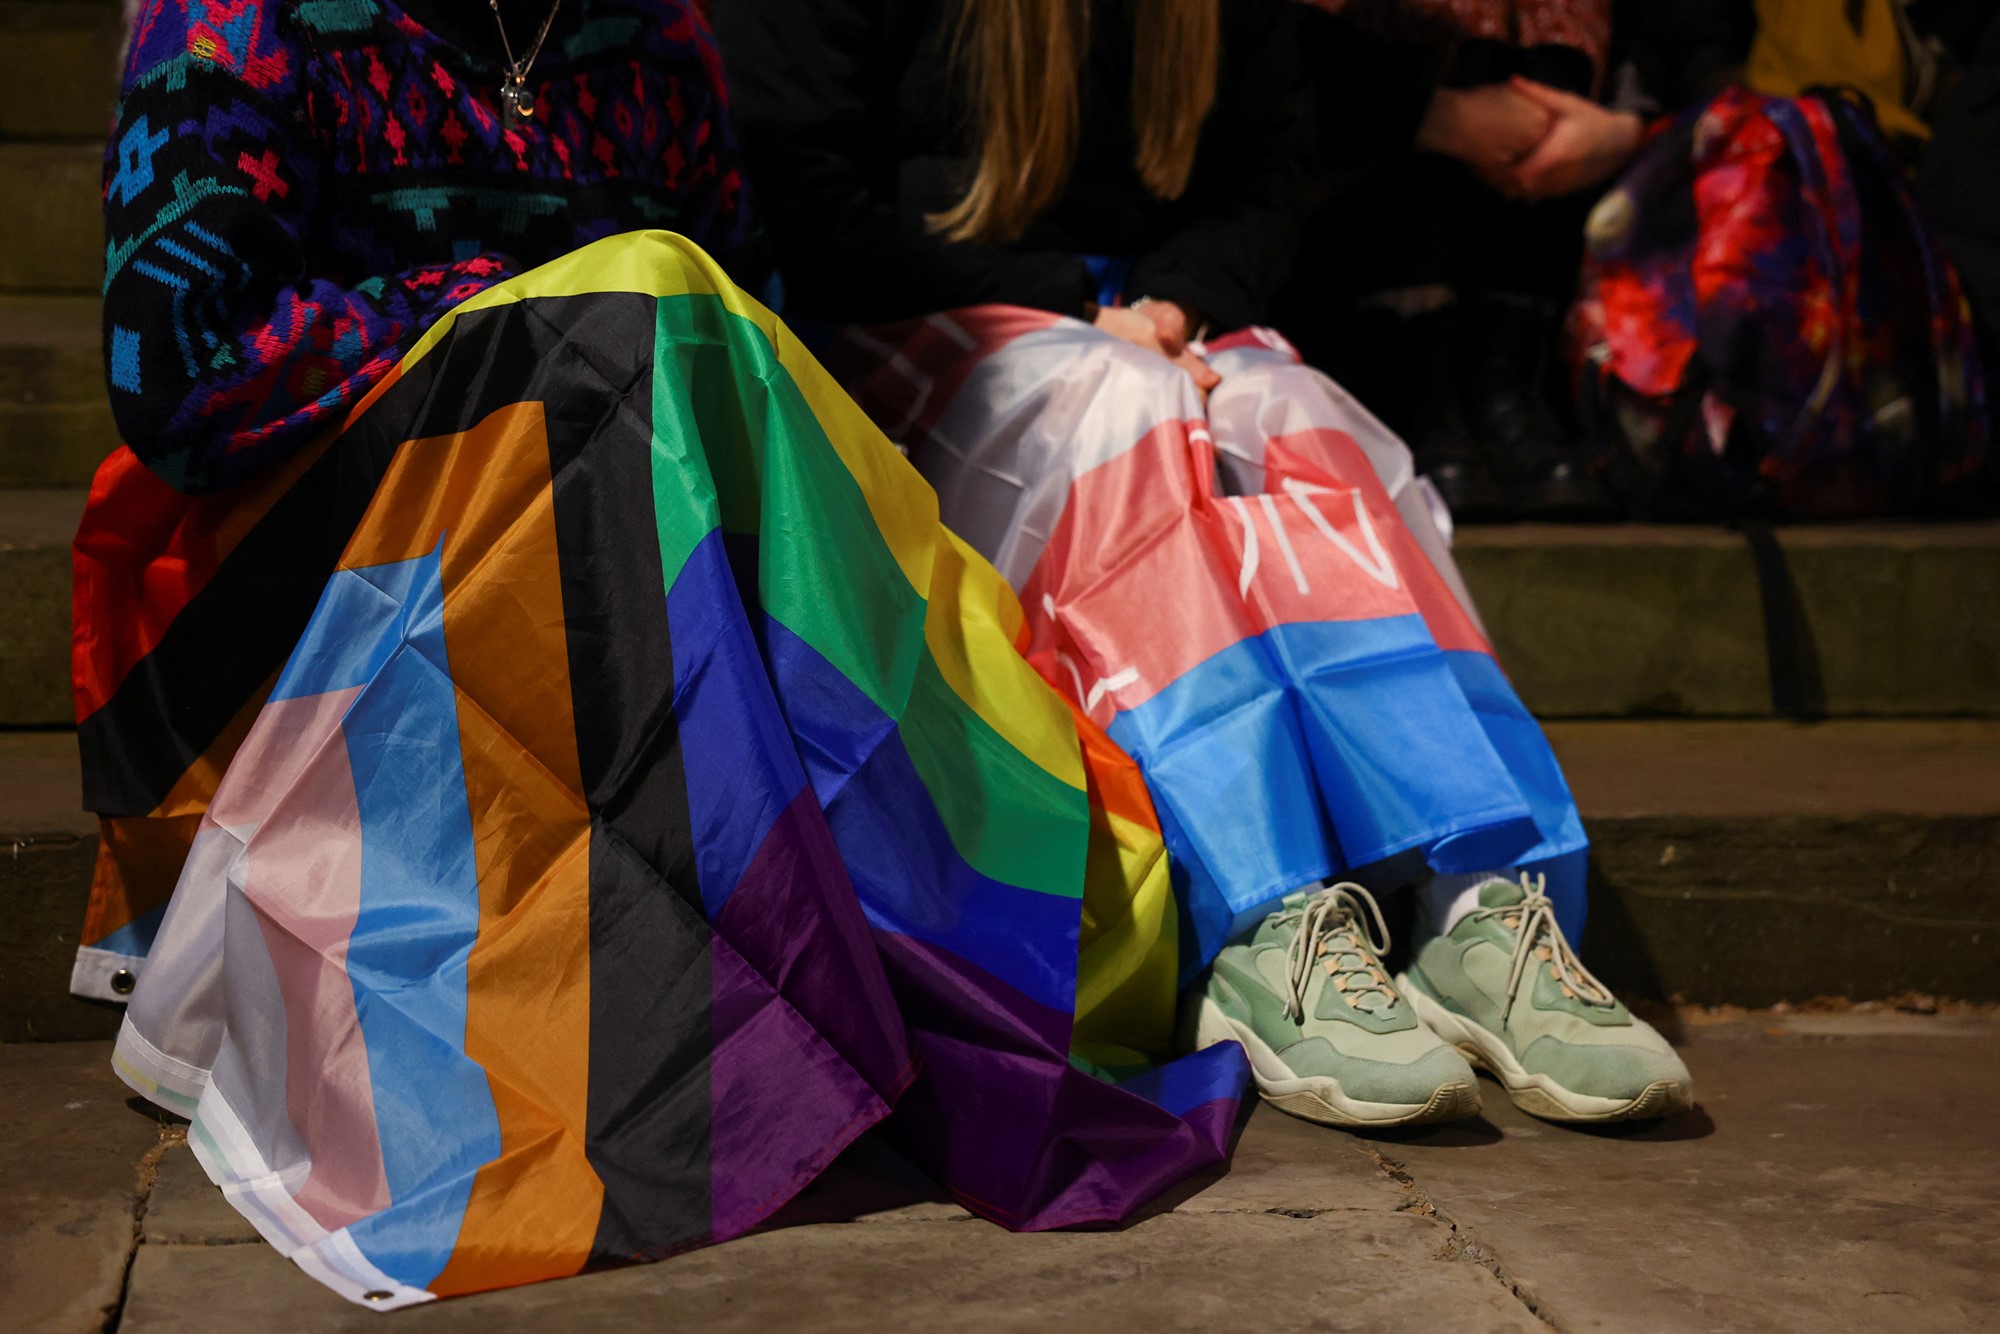 Two mourners sit together, one with the inclusive pride flag draped over their legs, the other with the trans flag.